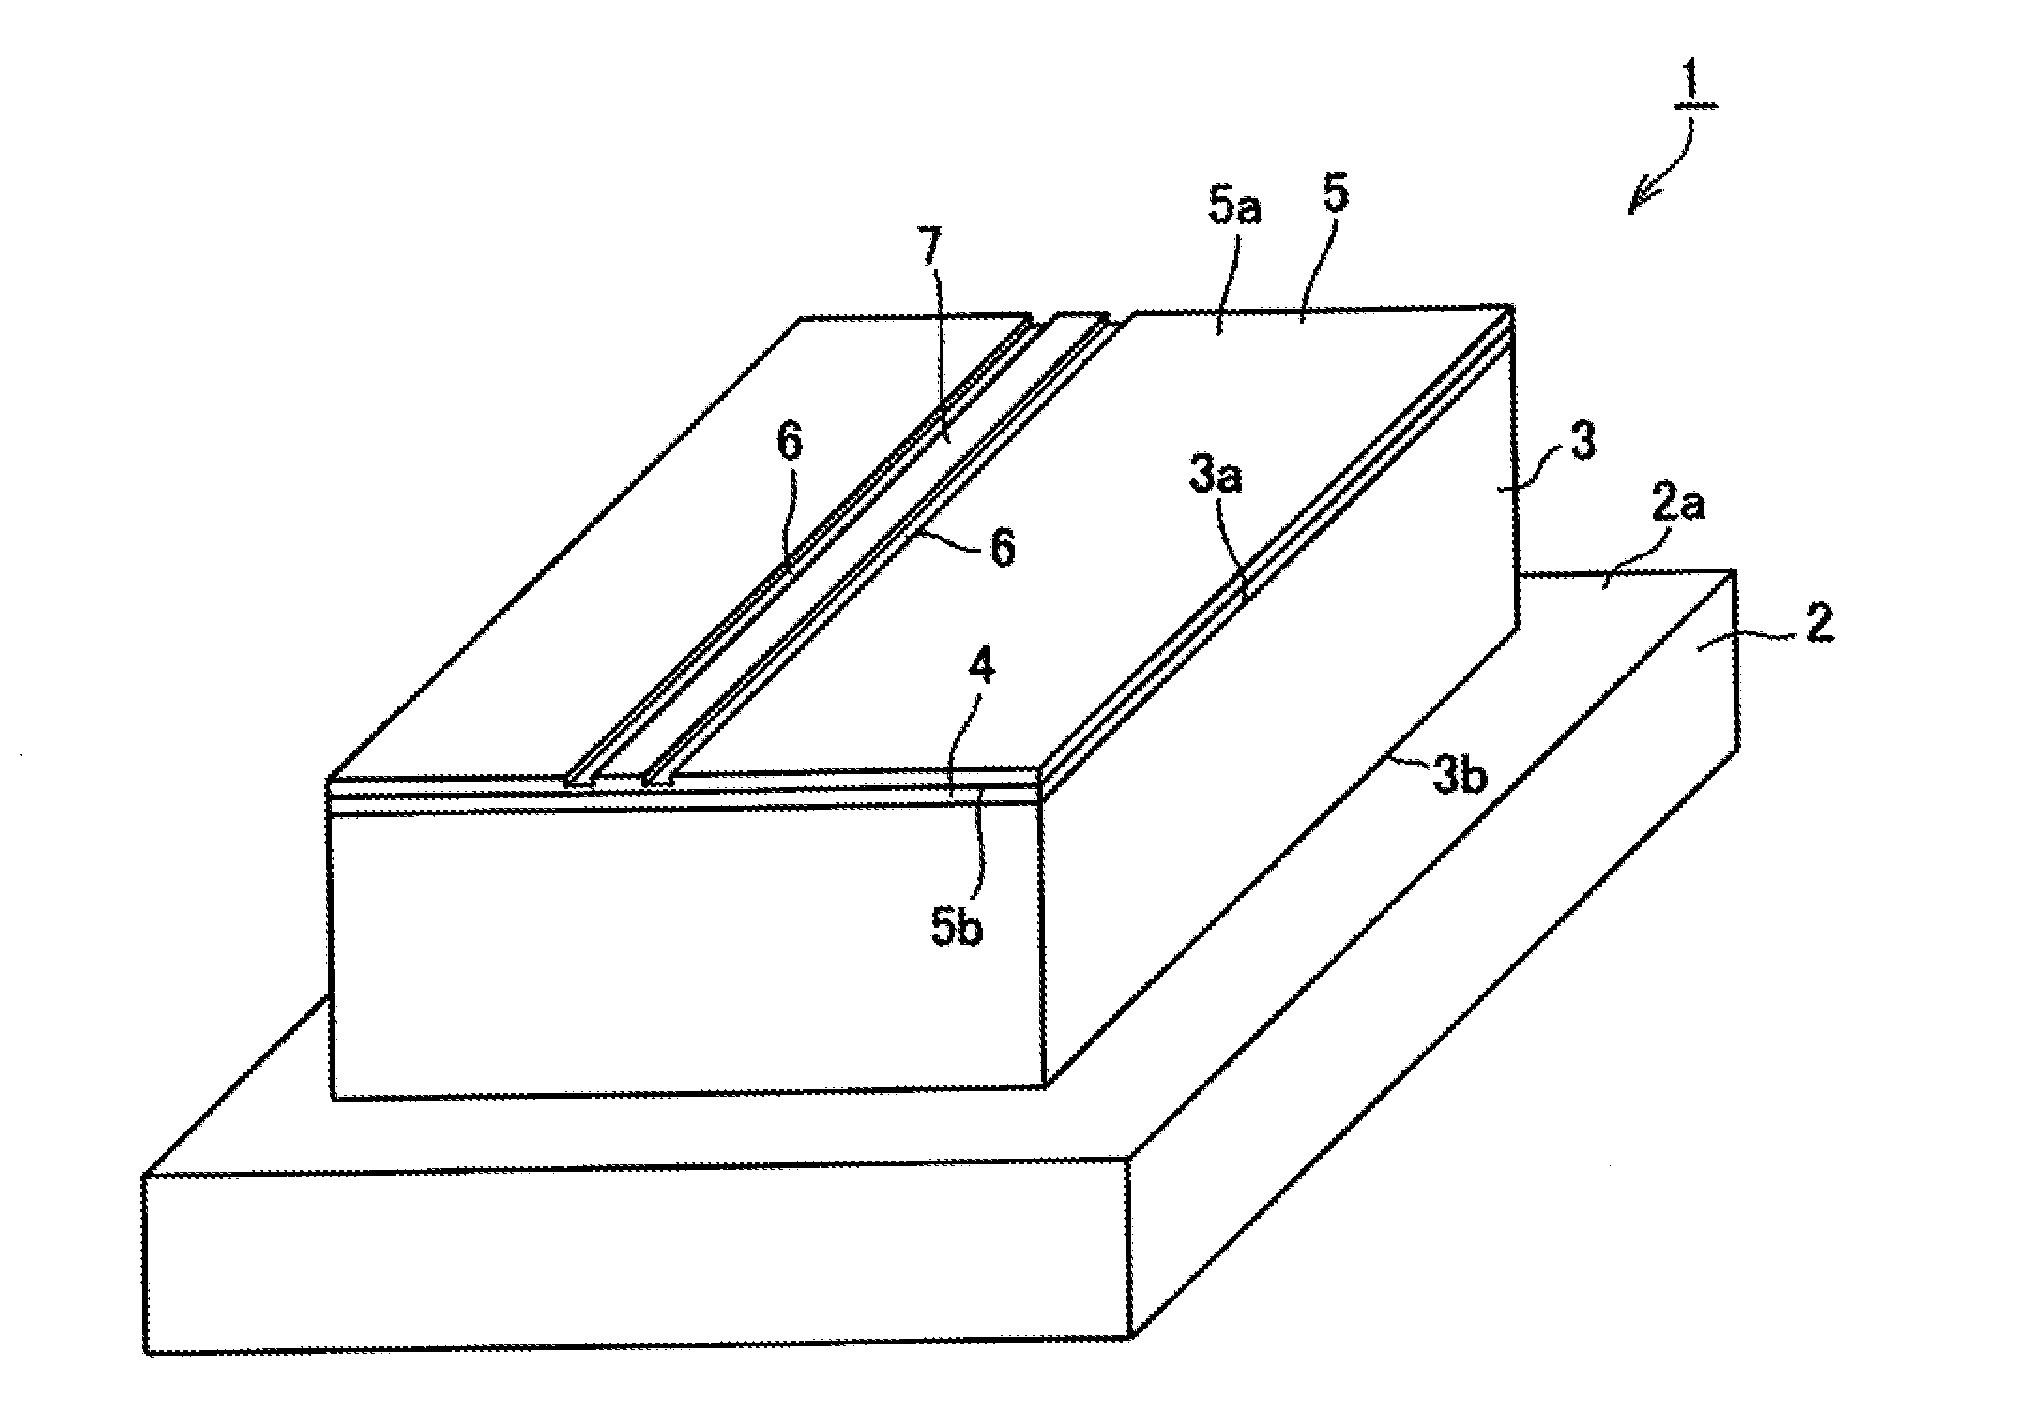 Semiconductor Wavelength Converting Devices and Light Sources for Generating Infrared Rays